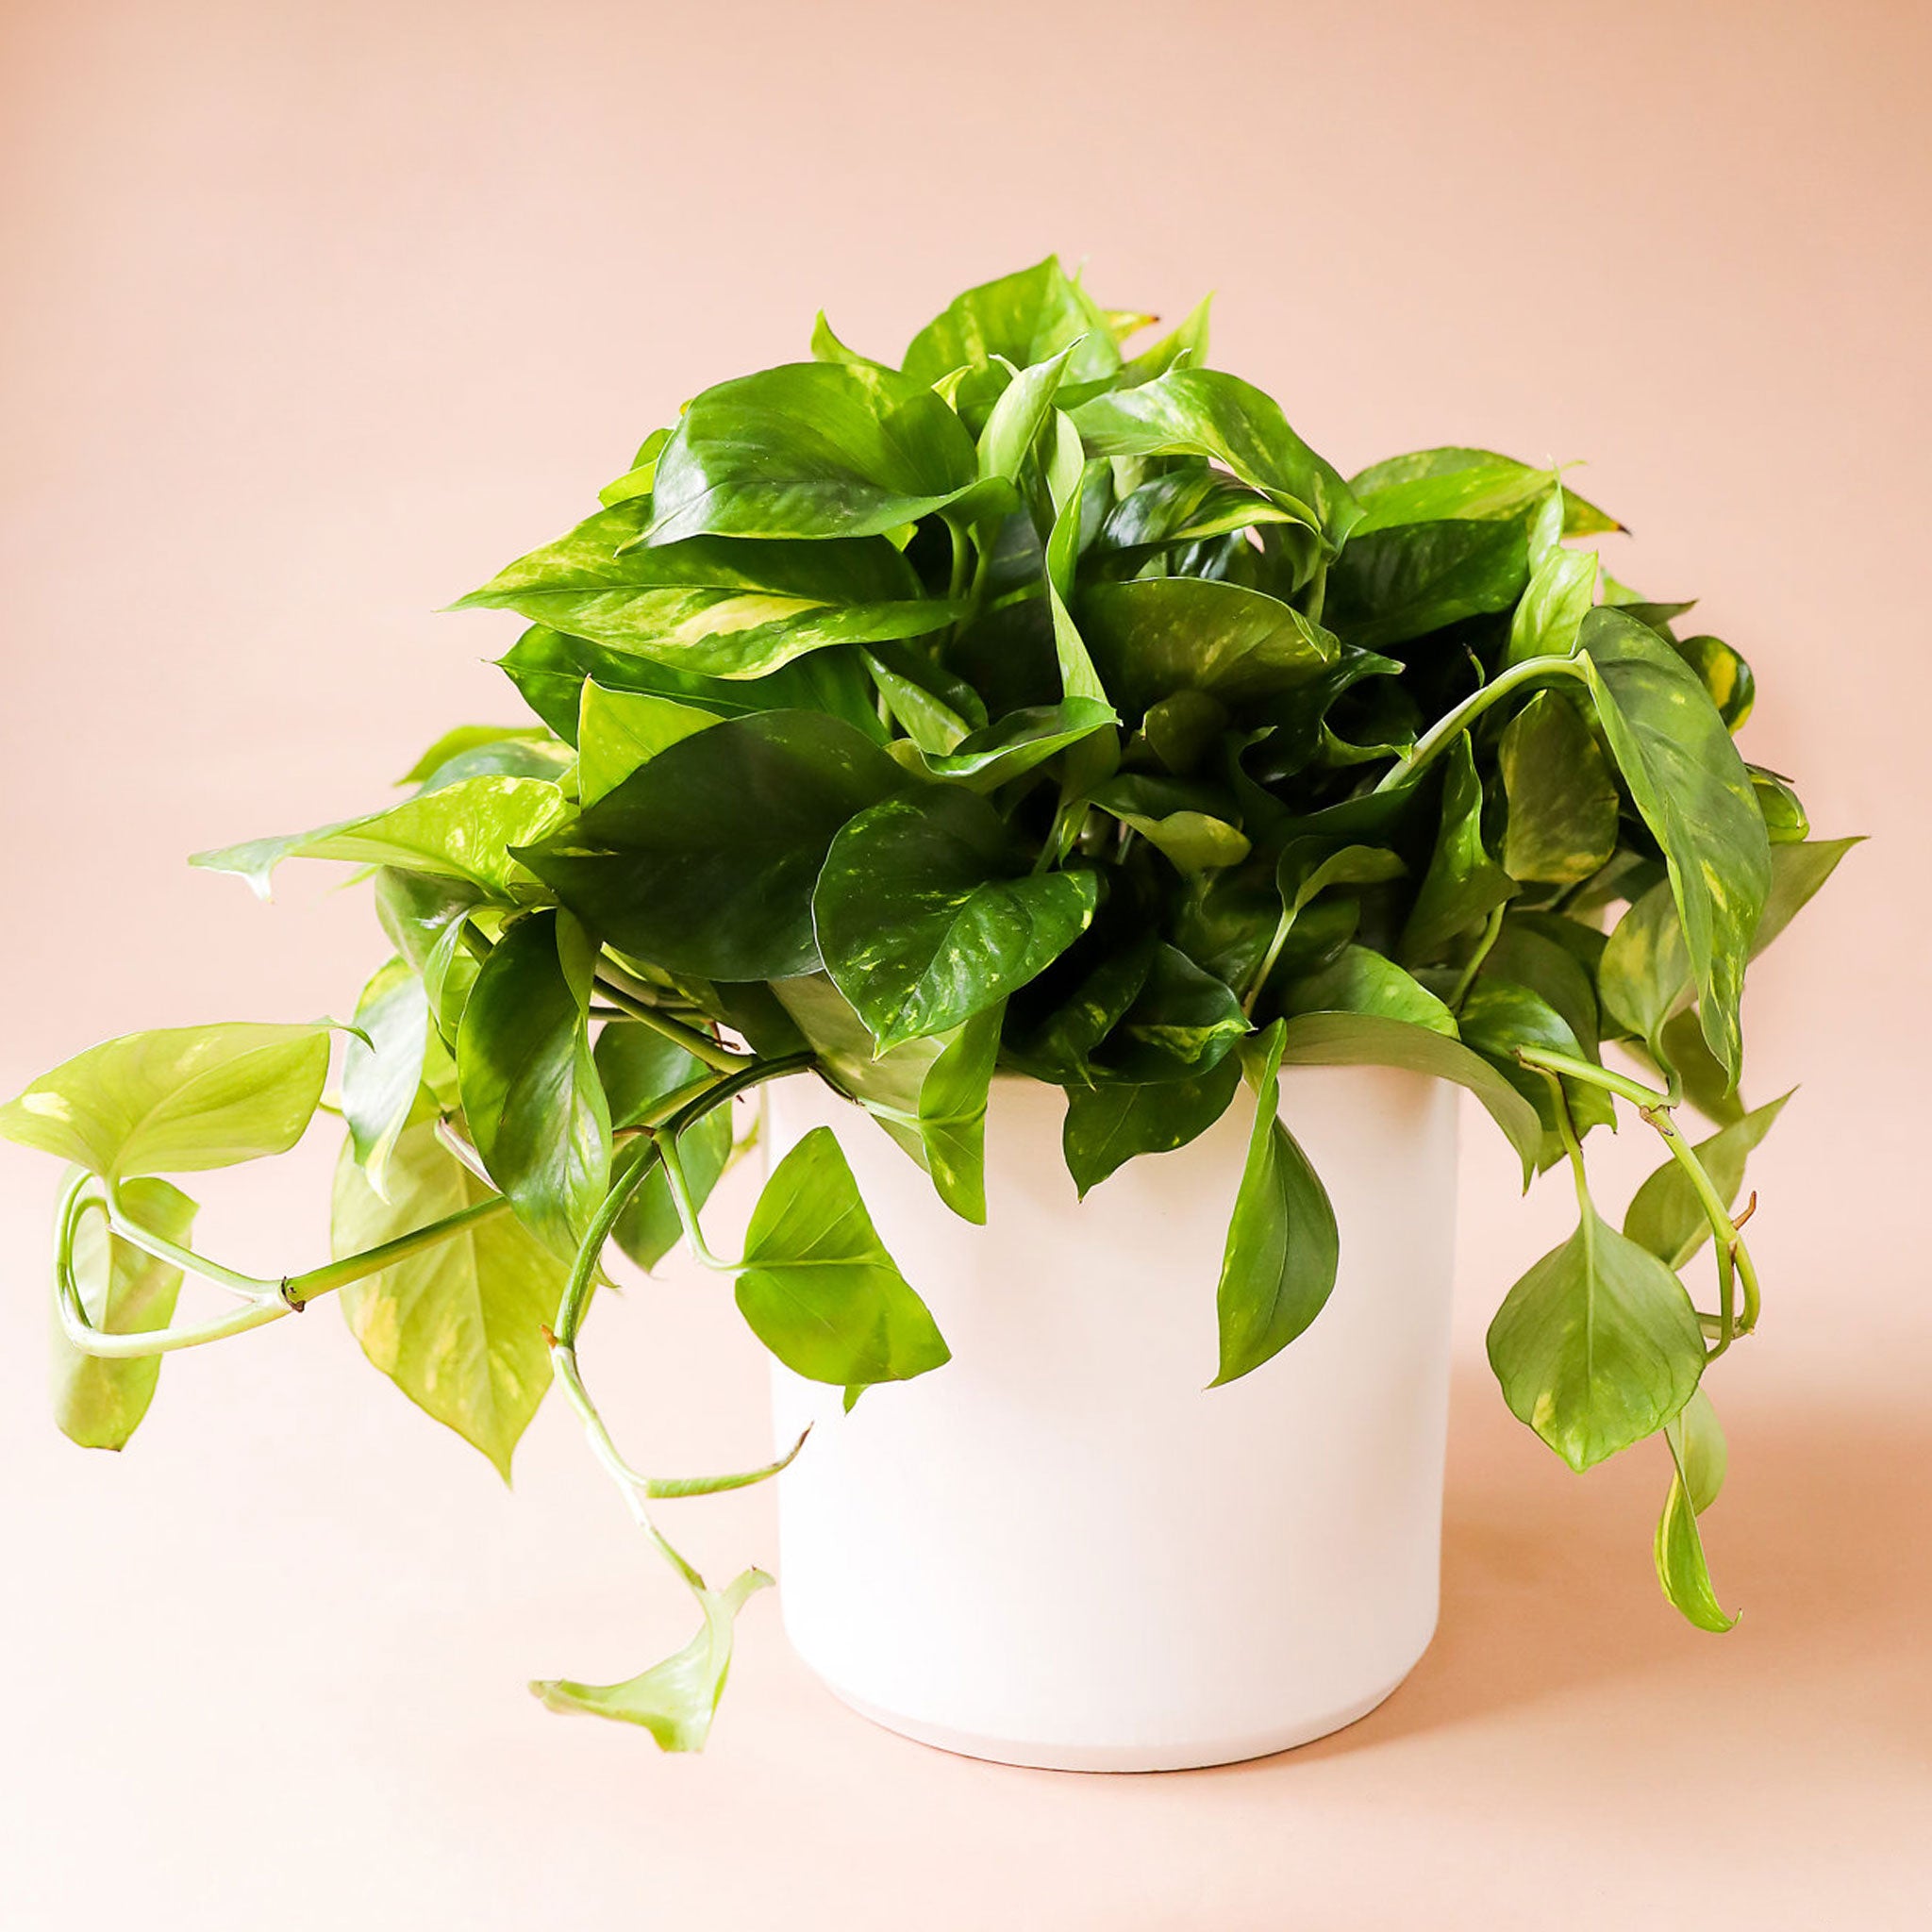 Variegated green and white Pothos plant that is full of fresh, plump leaves and growing green stems. Plant is potted in a solid white ceramic pot.